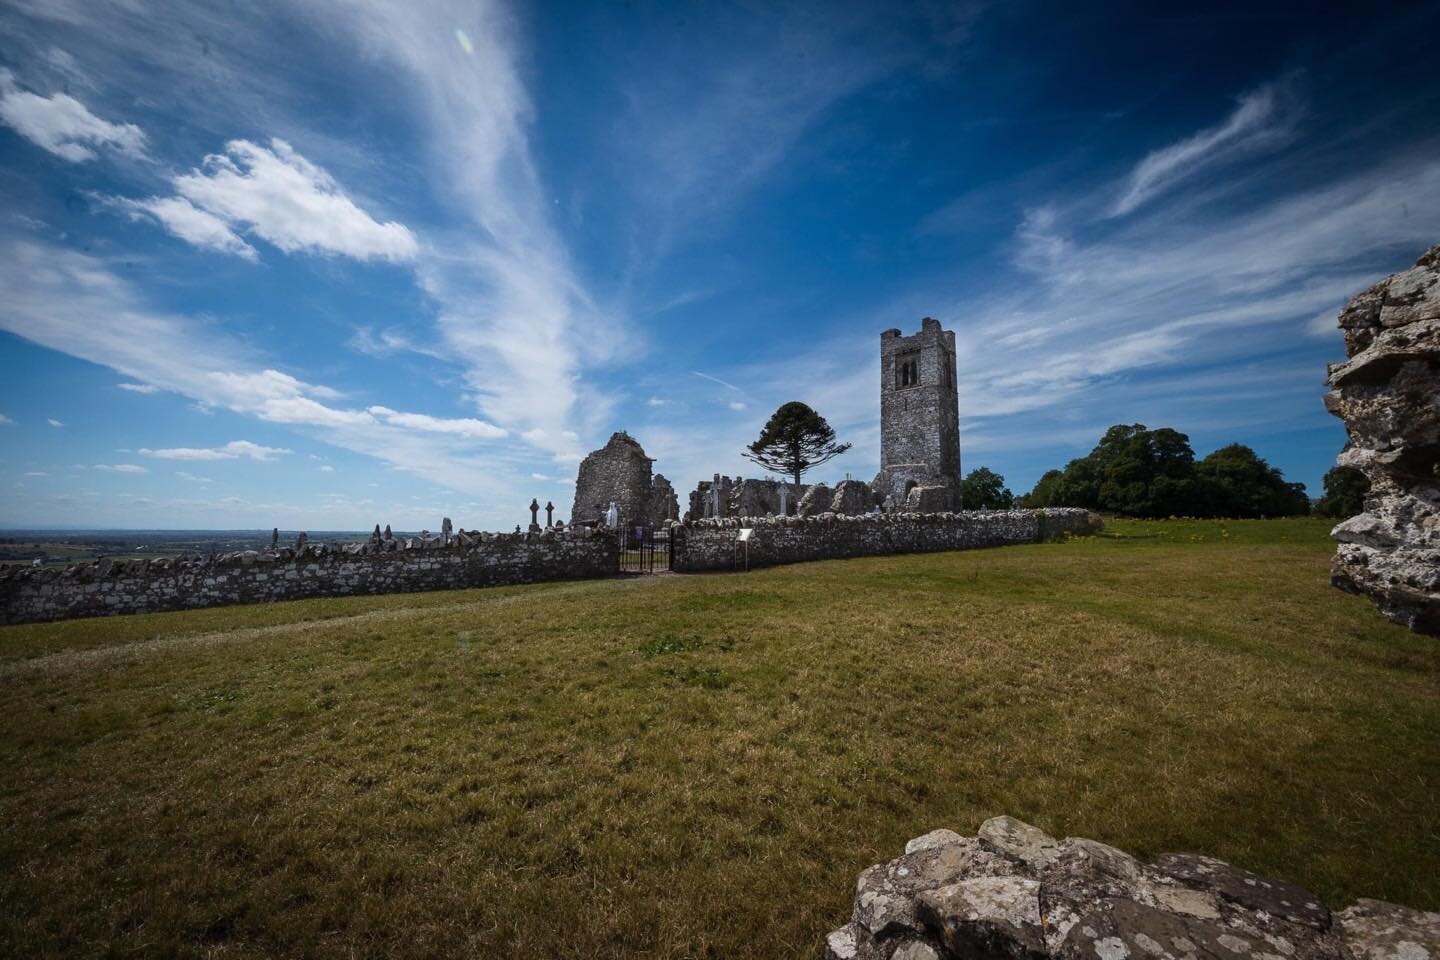 A sneak preview from the upcoming Meath tourism series.
Slane Abbey